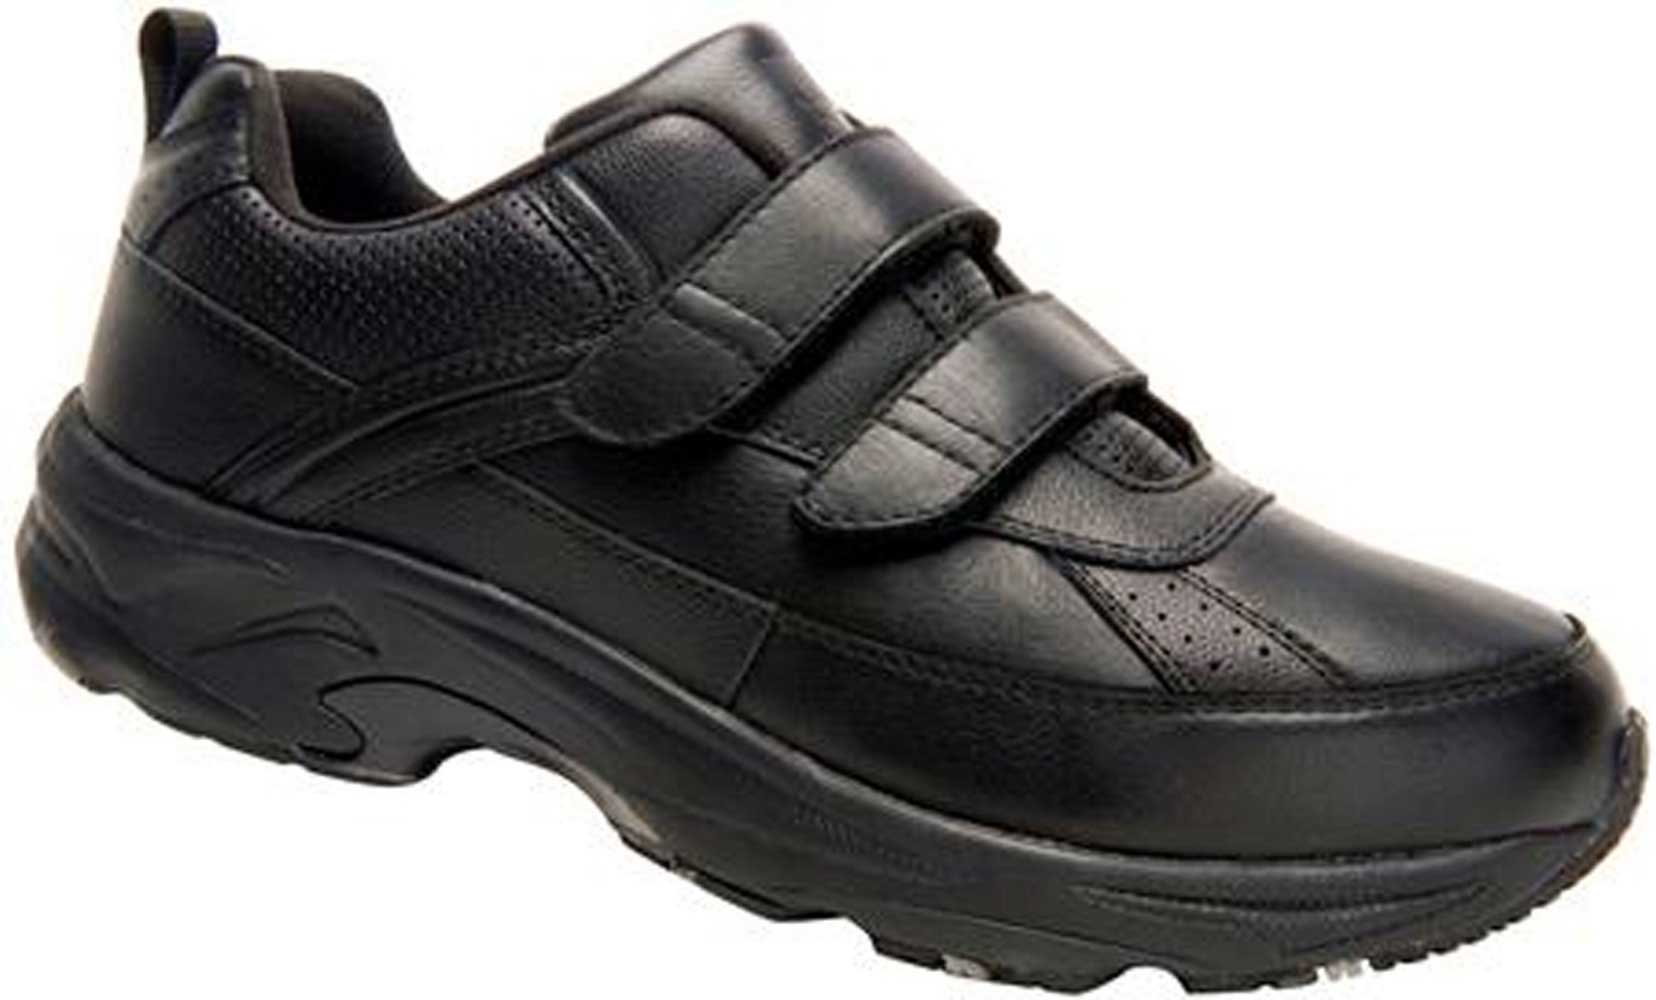 Drew Shoes Jimmy 44935 - Men's Comfort Therapeutic Diabetic Athletic Shoe - Extra Depth For Orthotics